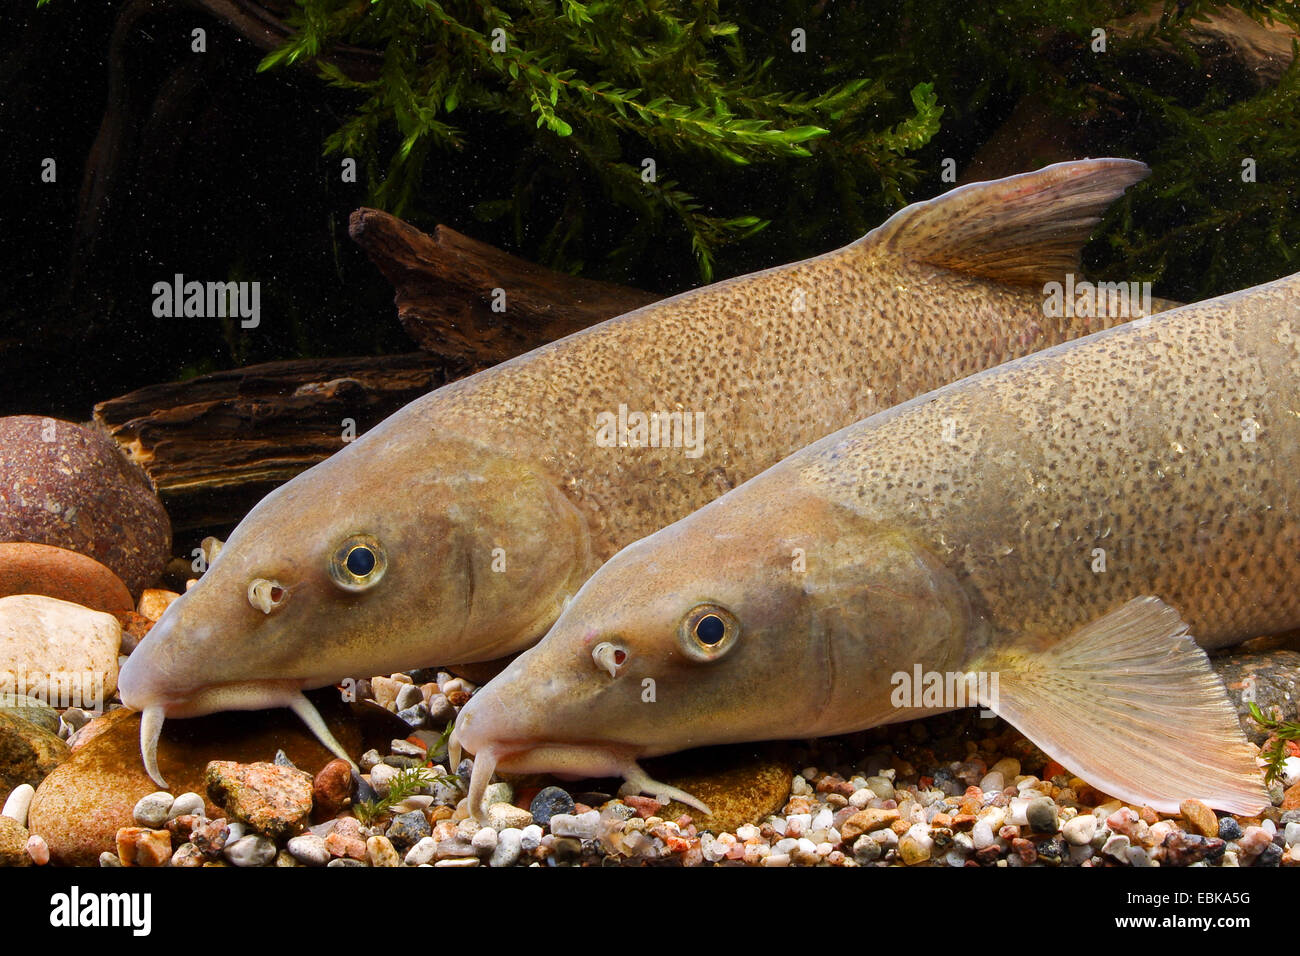 barbel (Barbus barbus), two barbels side by side aground, Germany Stock Photo